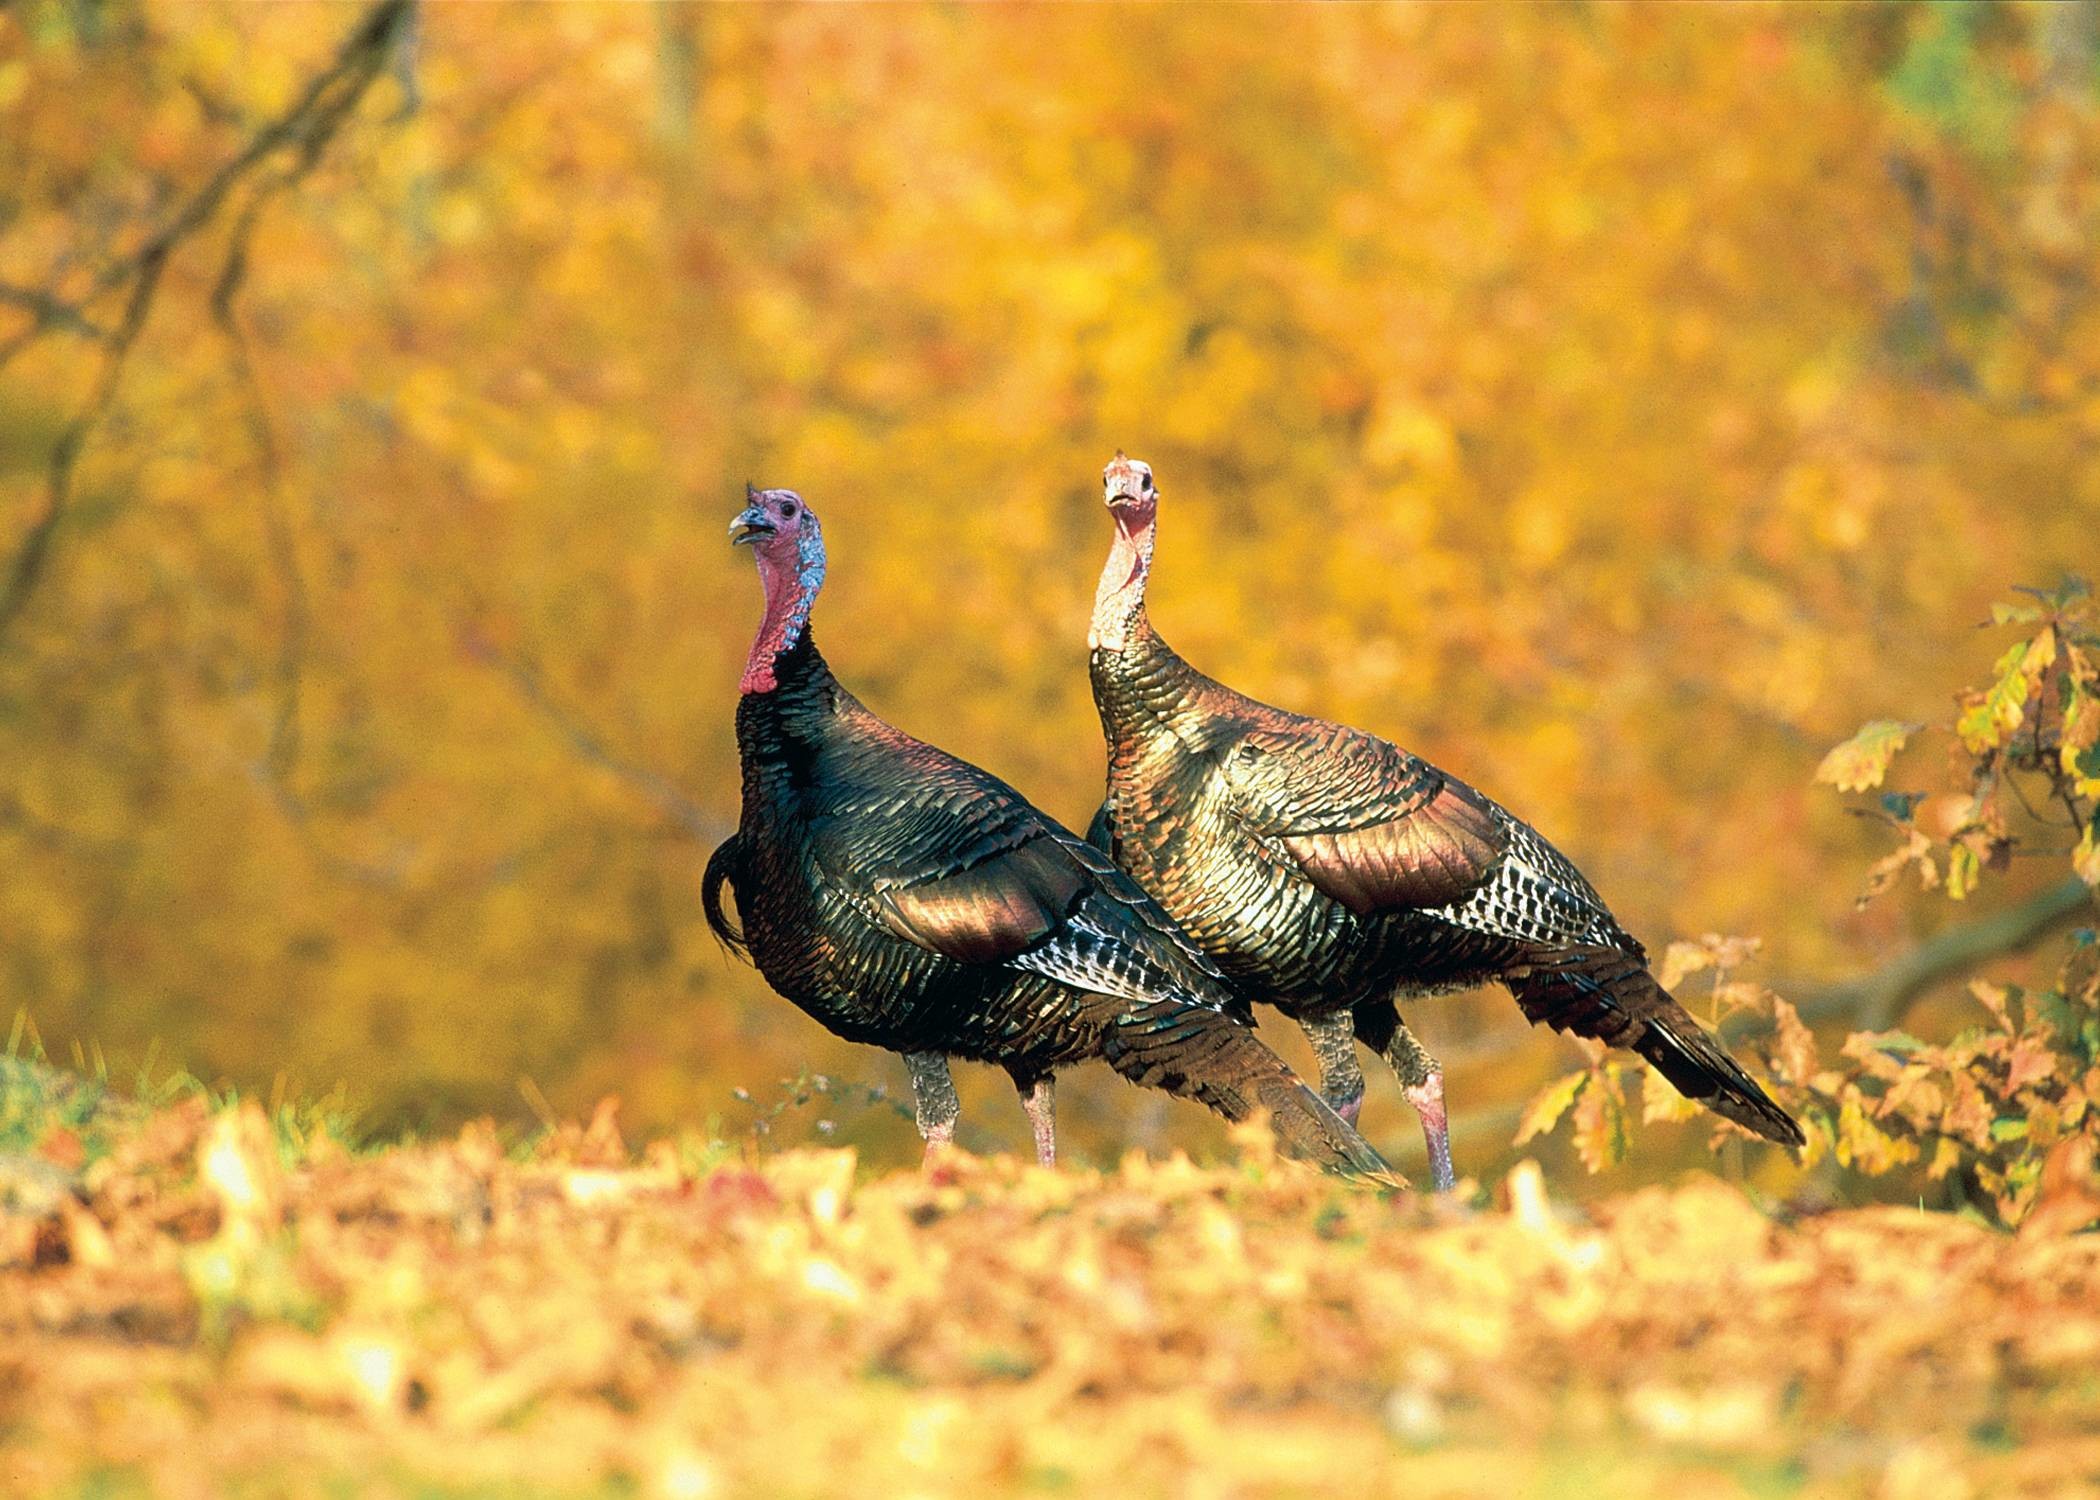 2100x1500 Turkey searching for food among the leaves Photo by MaslowskiNWTF 